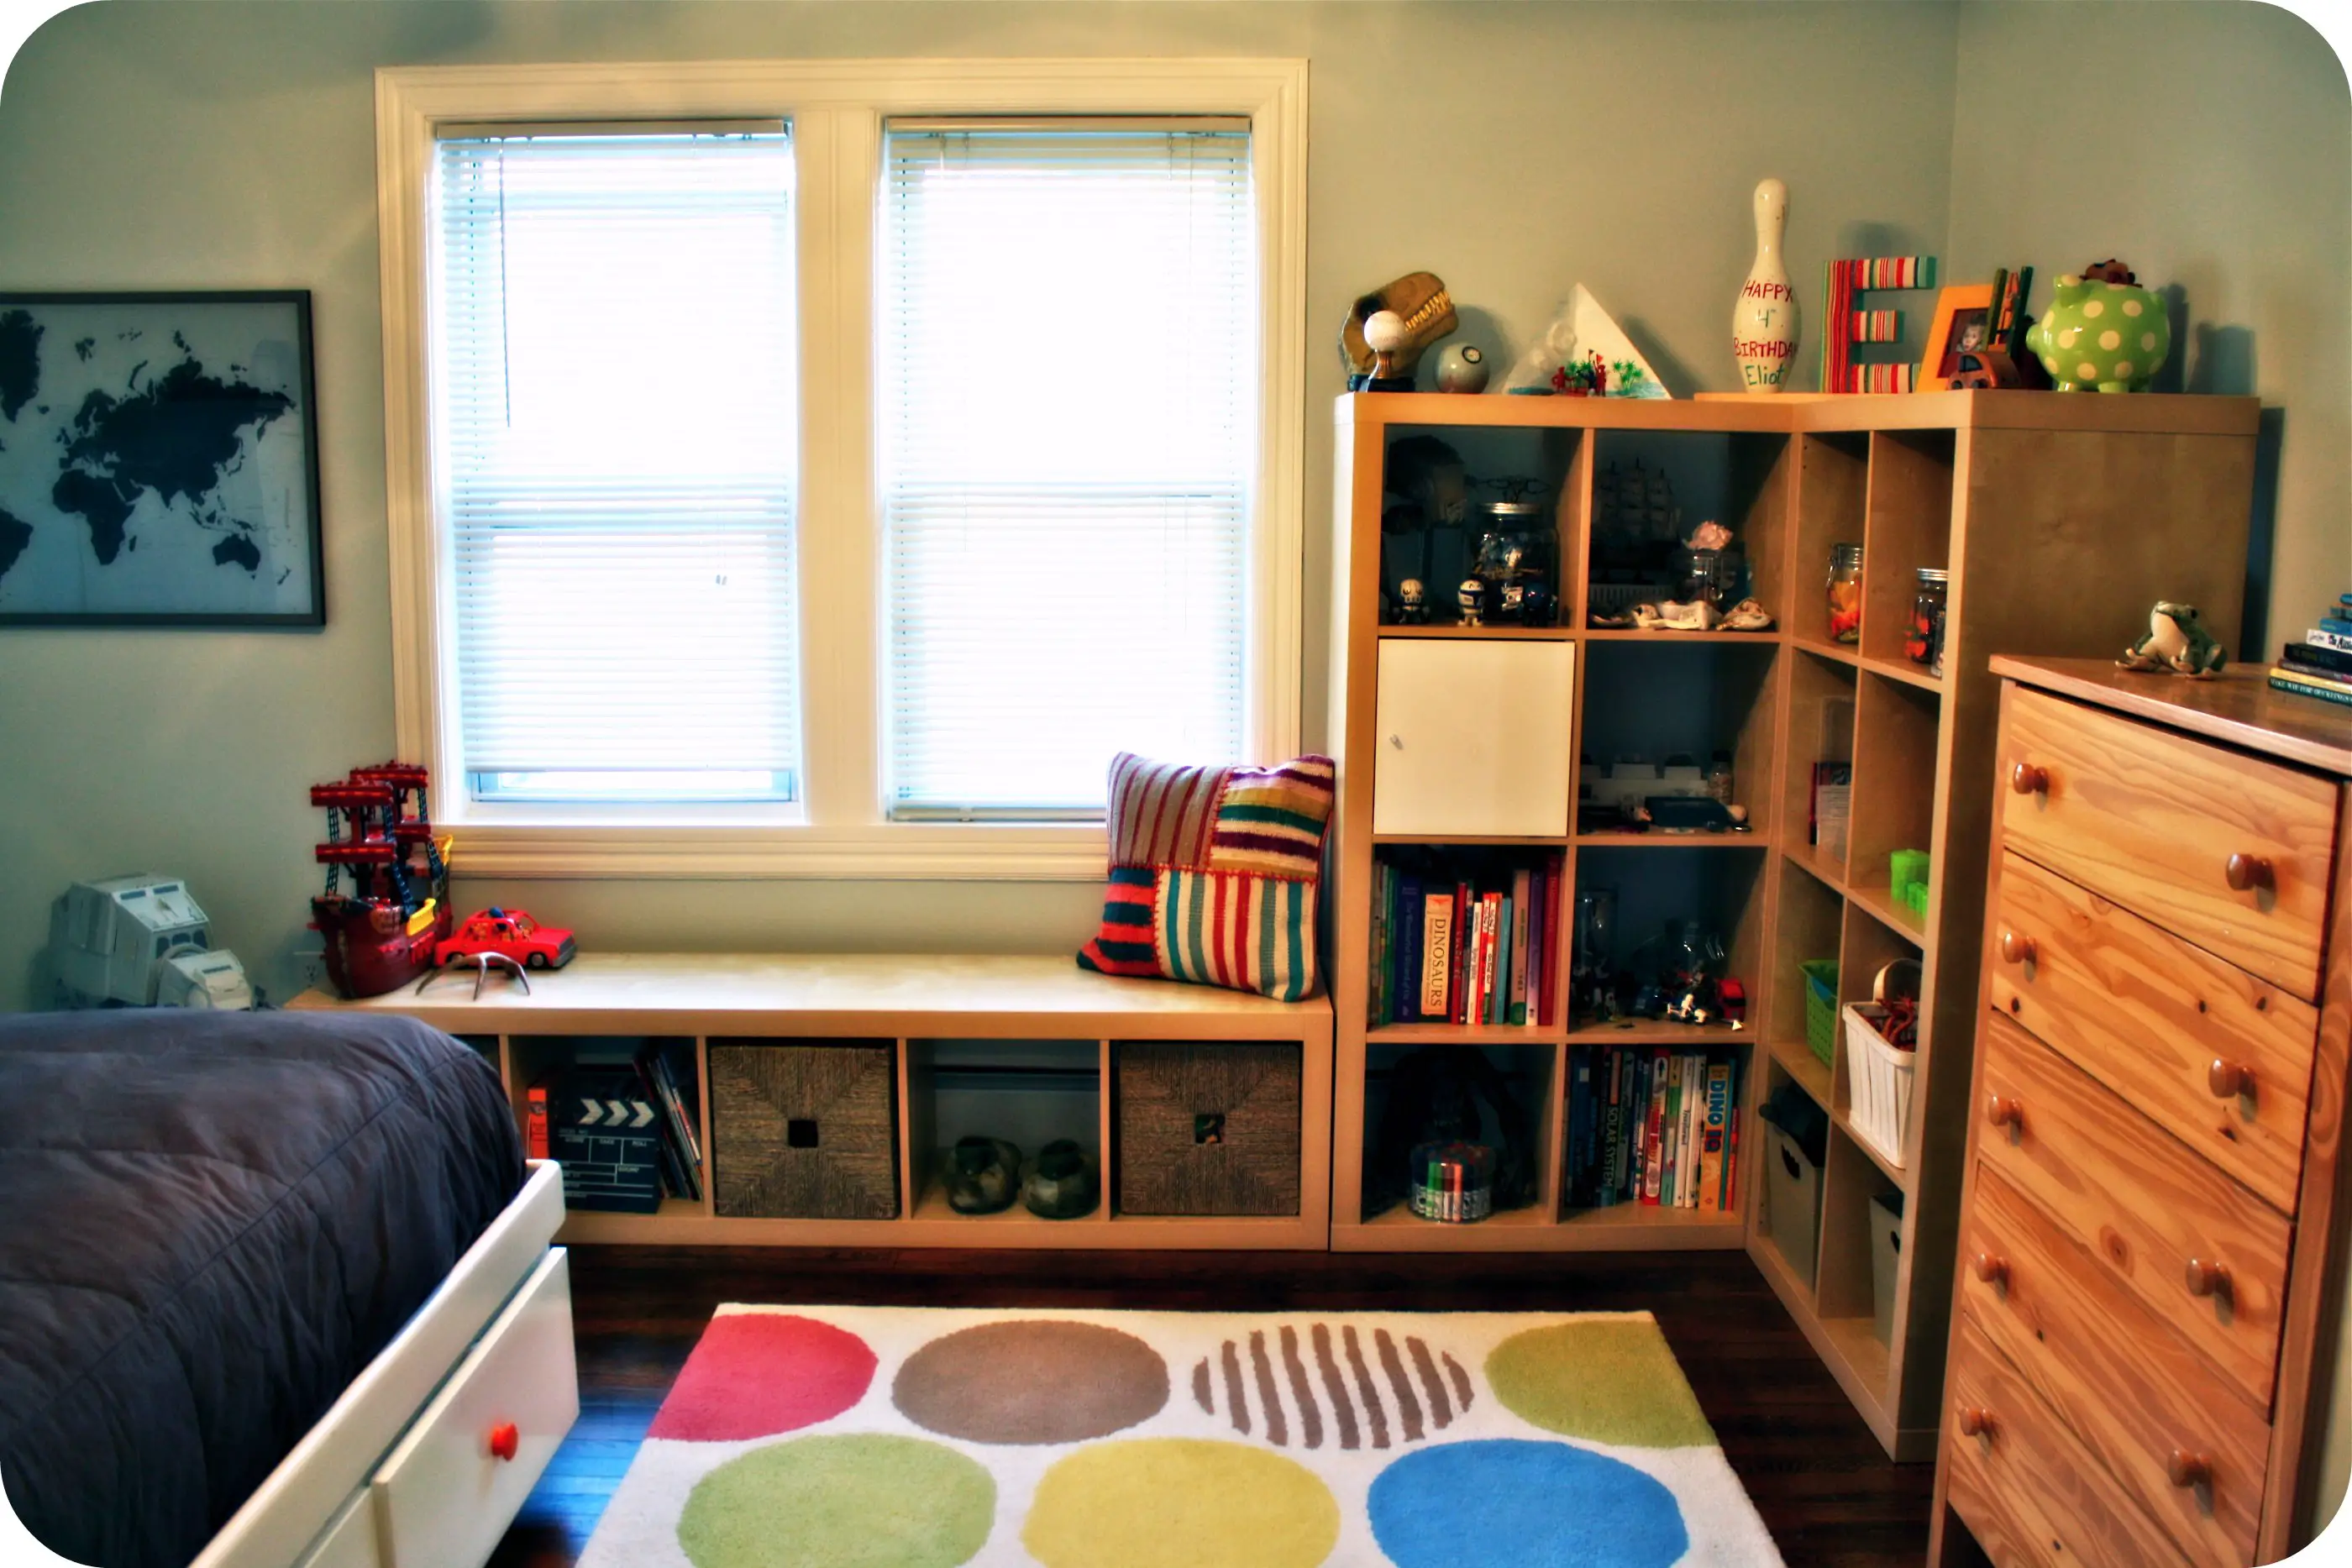 Image of a children's room neatly organized with cube shelves